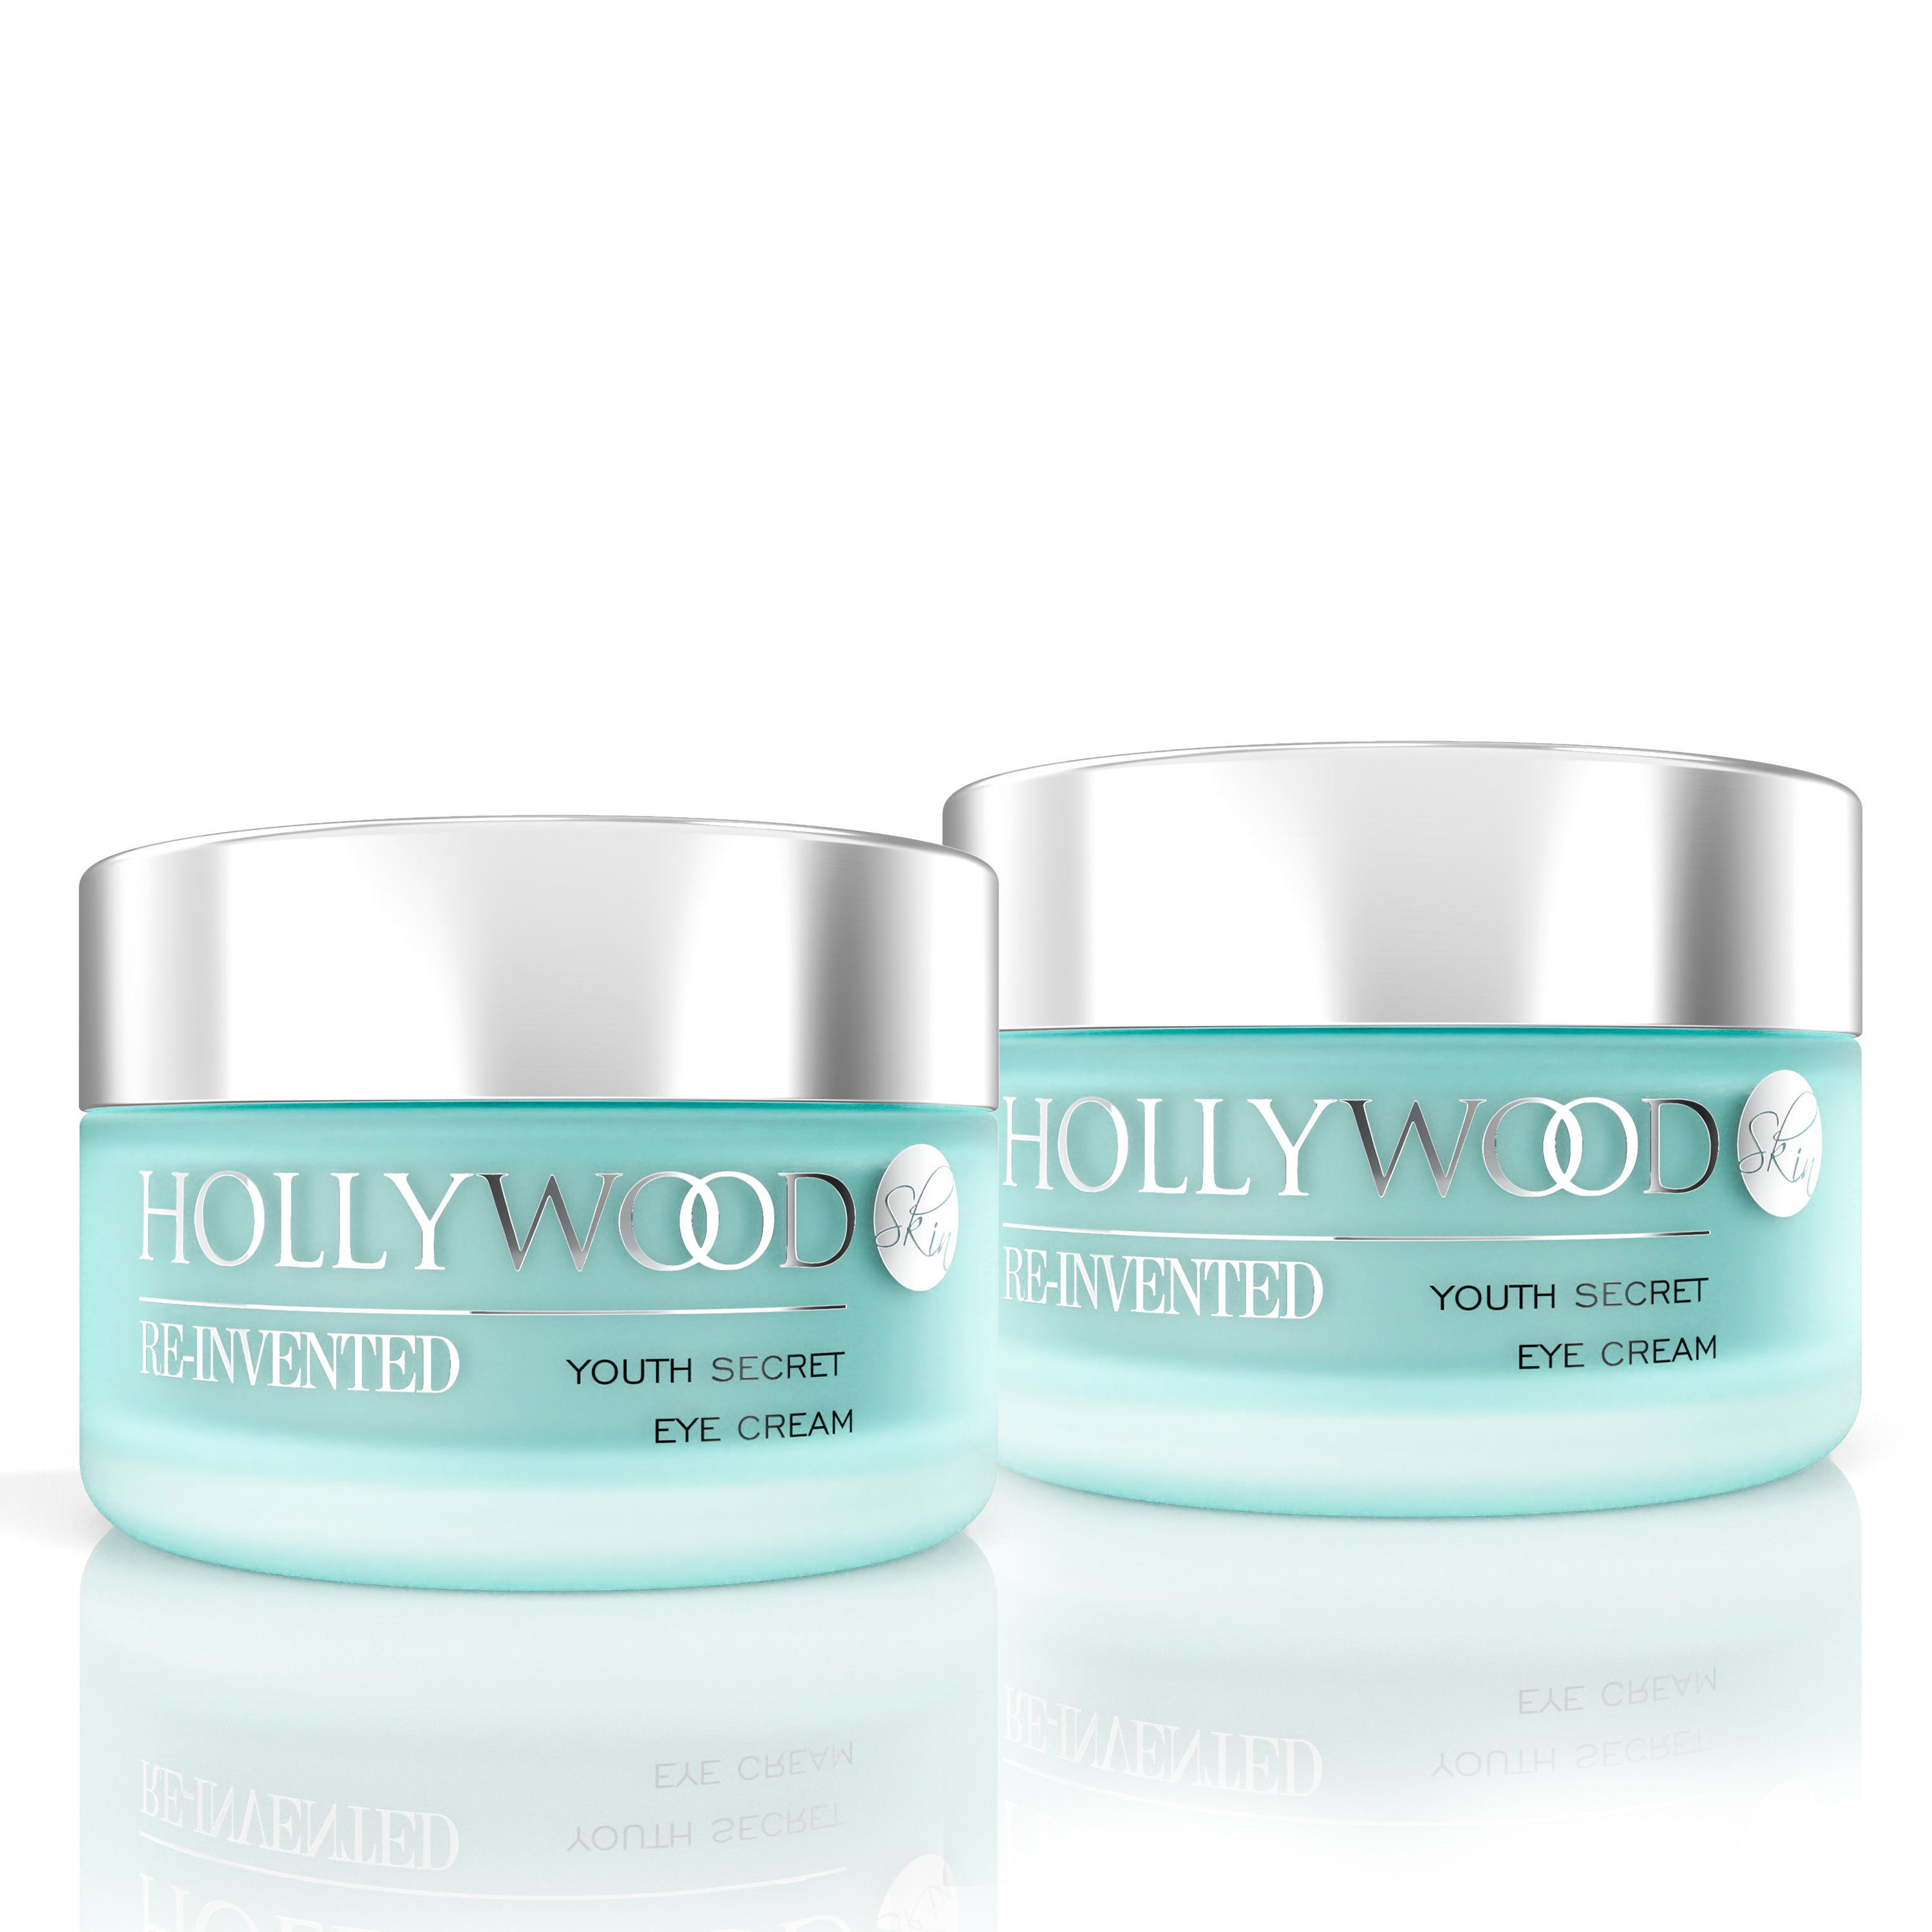 SPECIAL OFFER - Youth Secret Eye Cream x 2 jars - Massive 38% Discount